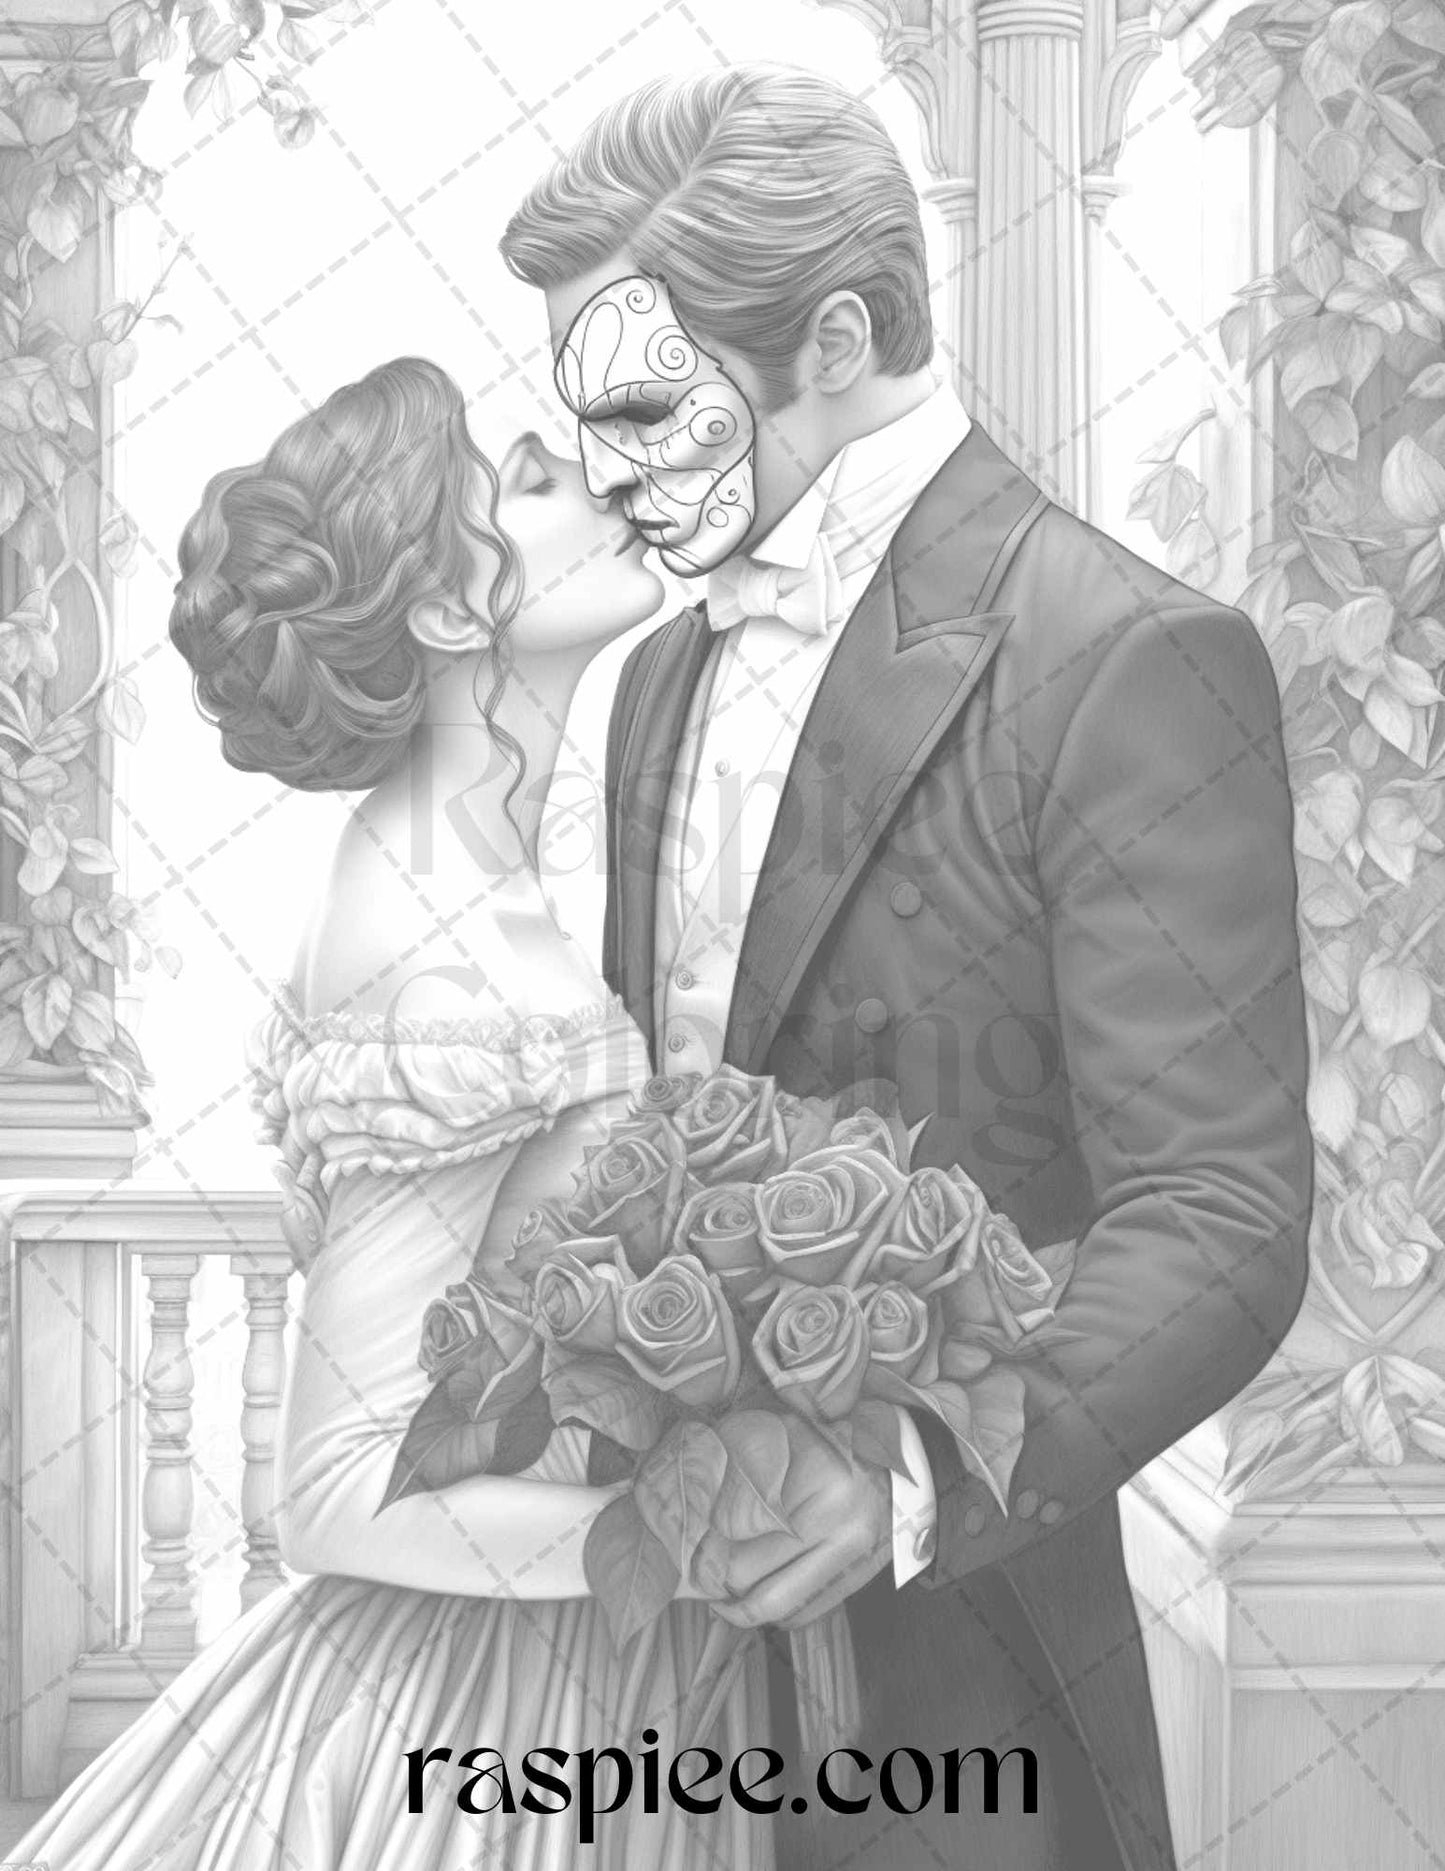 Phantom of the Opera Grayscale Coloring Pages Printable for Adults, PDF File Instant Download - Raspiee Coloring